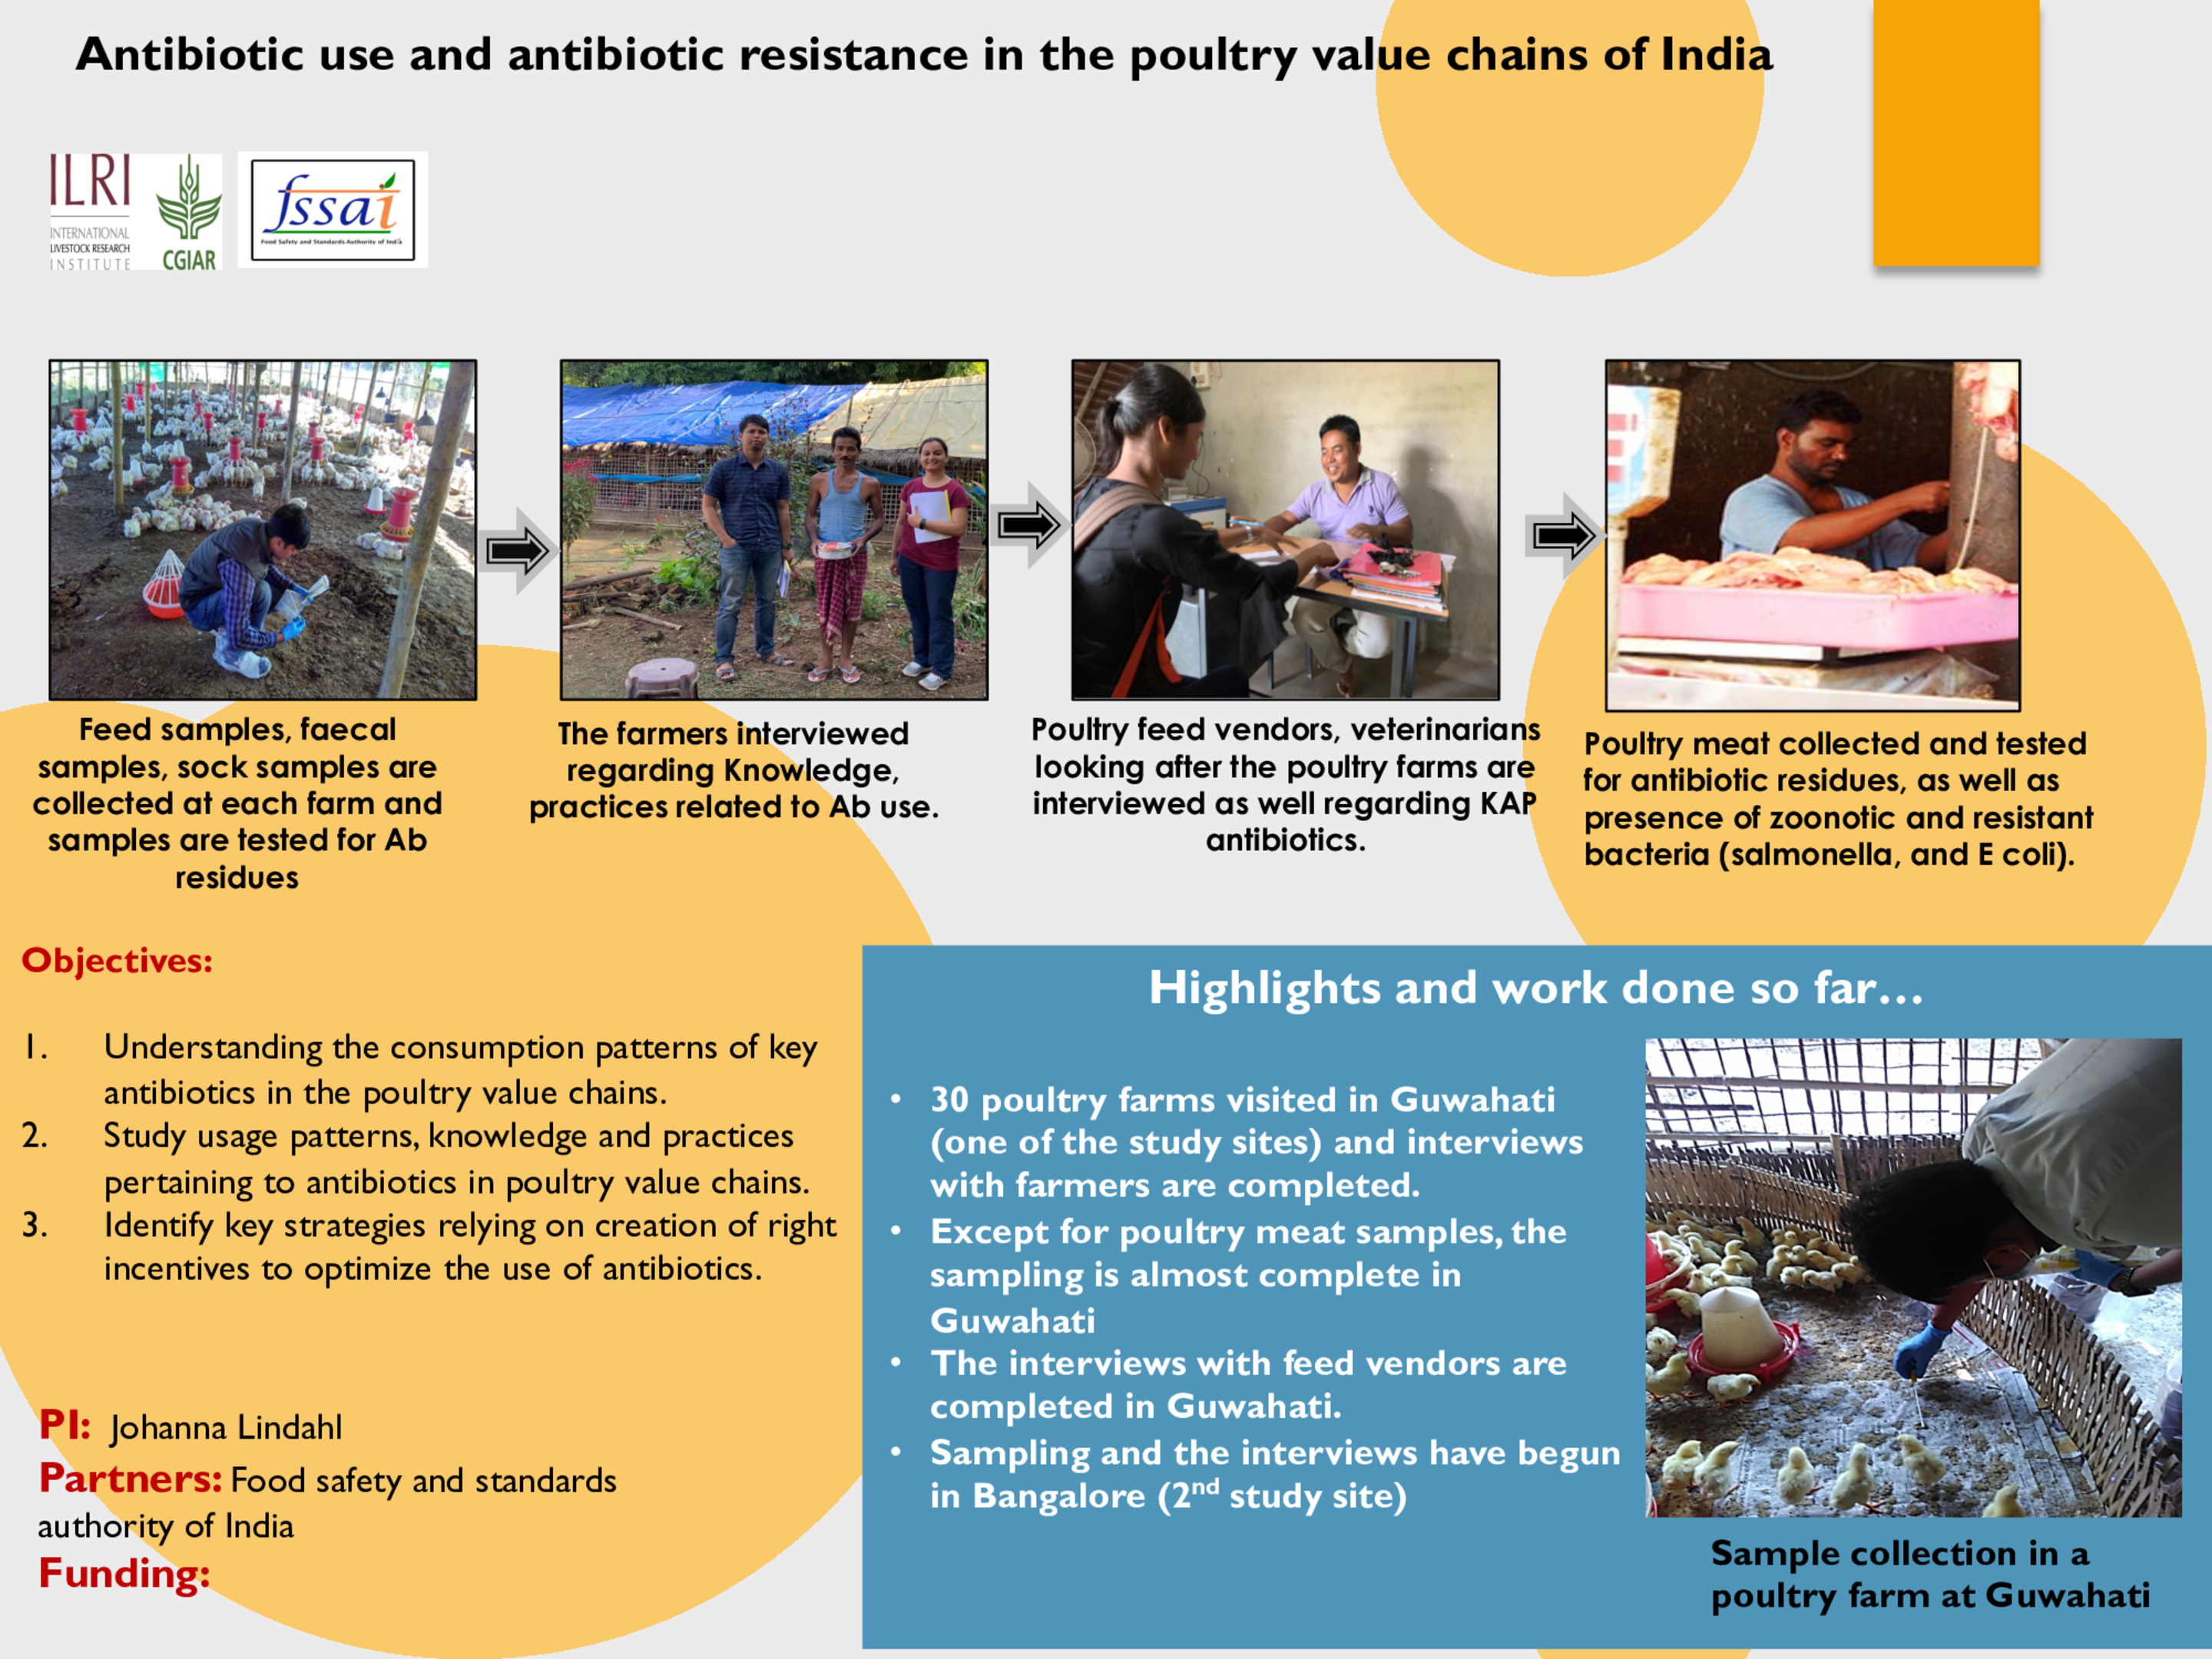 Antibiotic use and antibiotic resistance in the poultry value chains of India